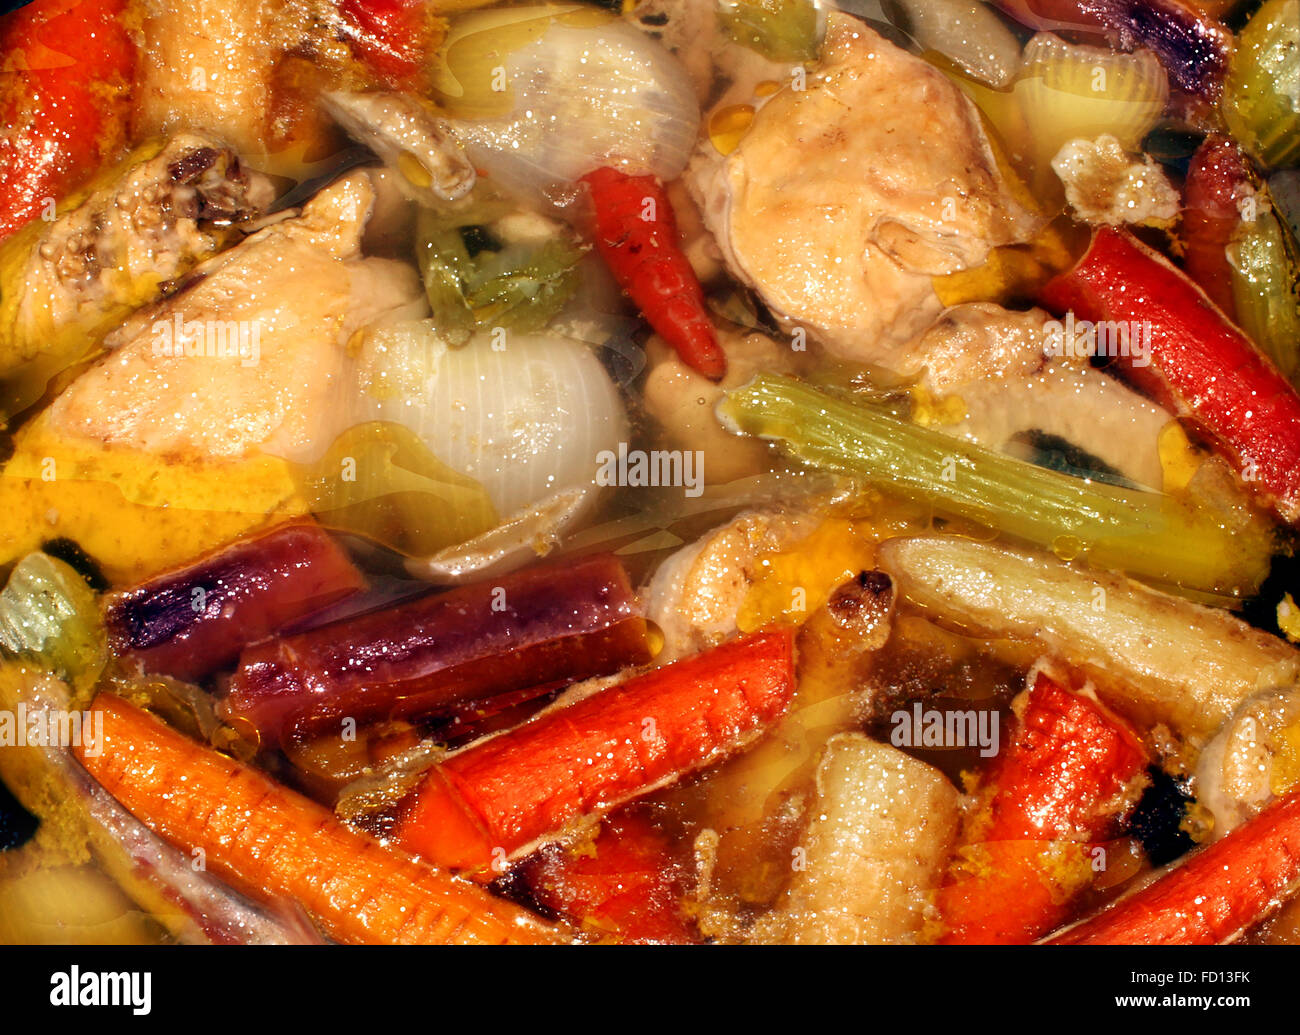 Rustic soup and healthy eating real food background made from scratch as a slow cooking hearty stew made of fresh chicken and market garden whole natural vegetables. Stock Photo